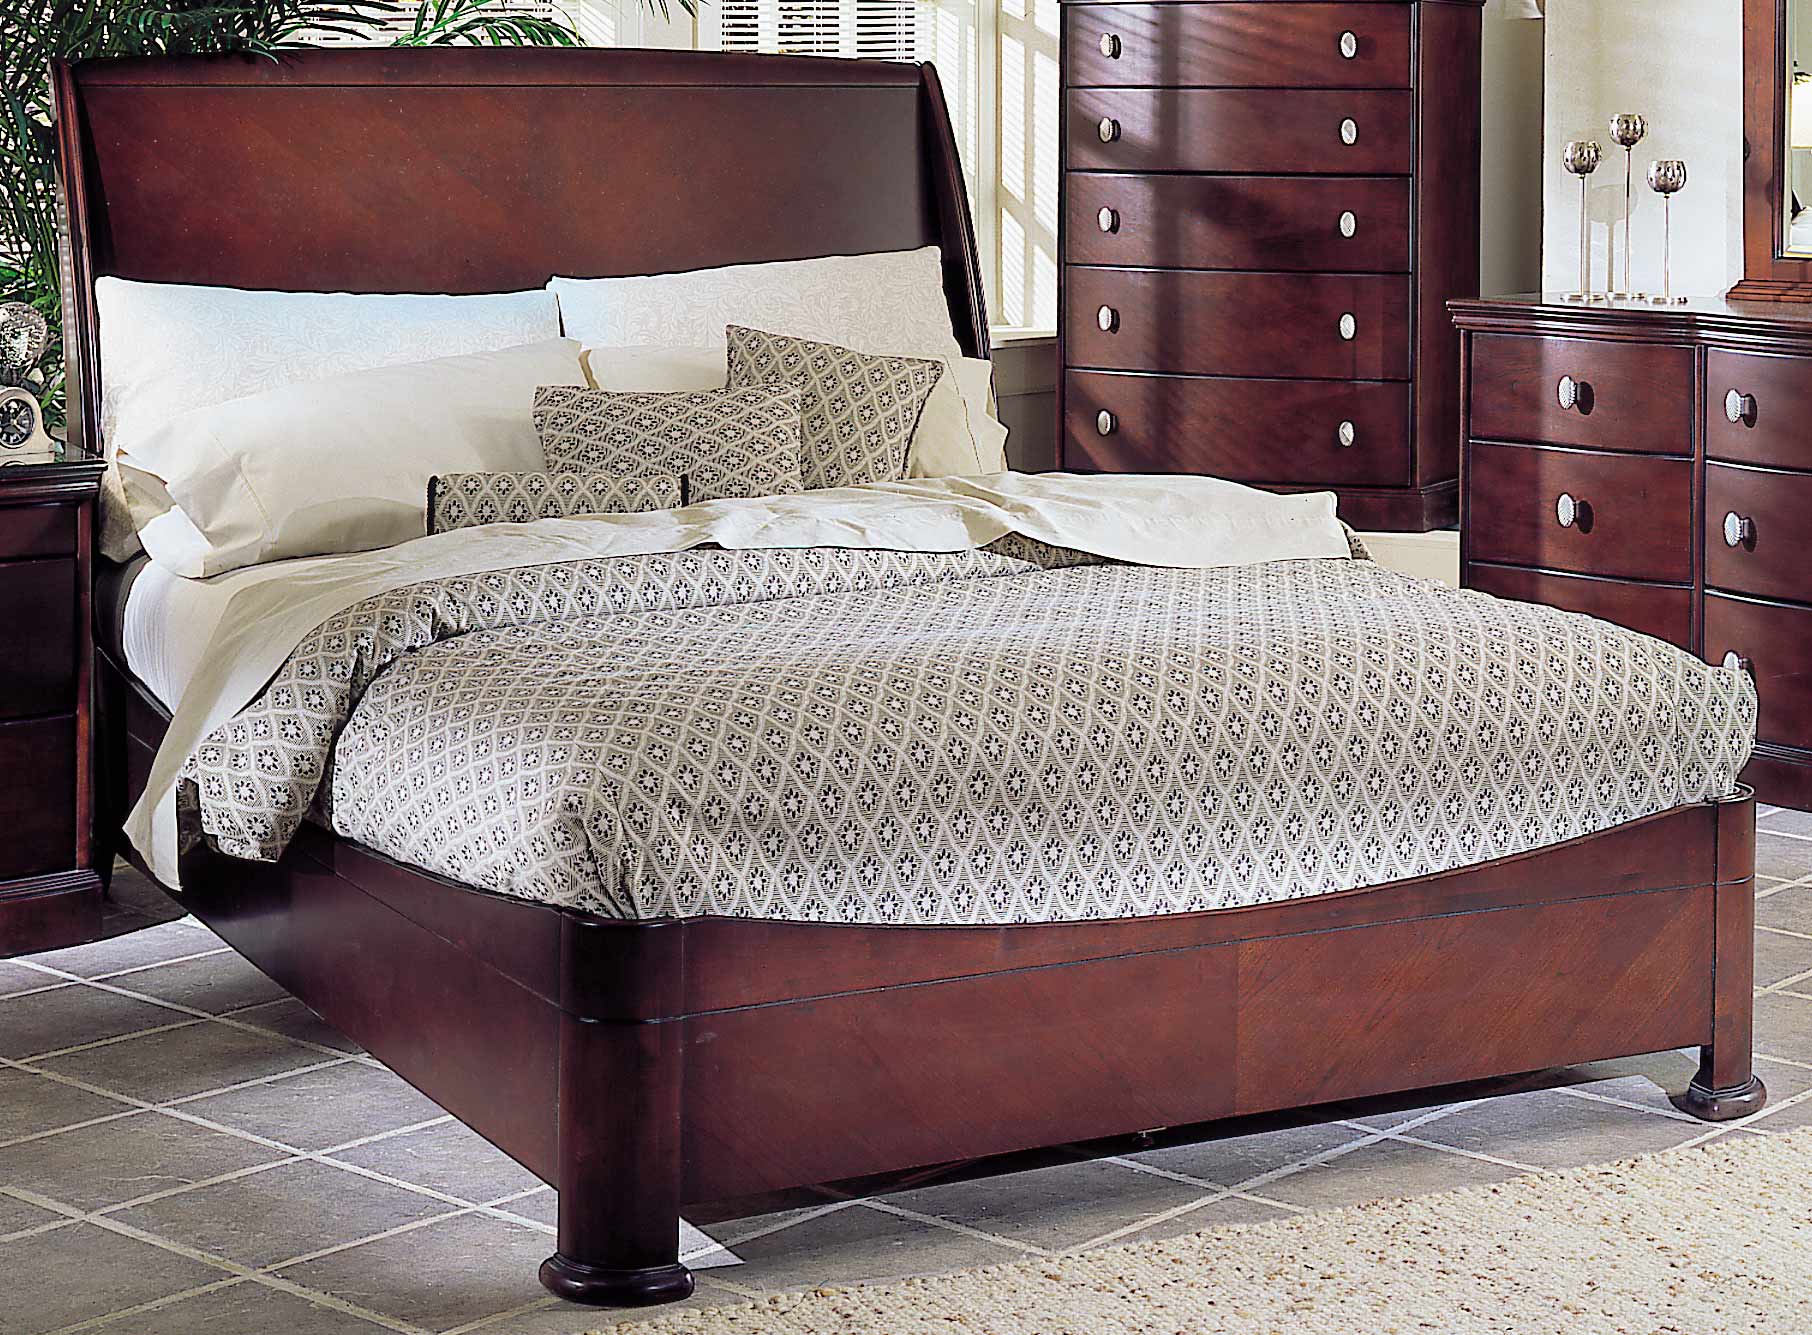 Homelegance 5th Avenue Bed with Low Profile Footboard